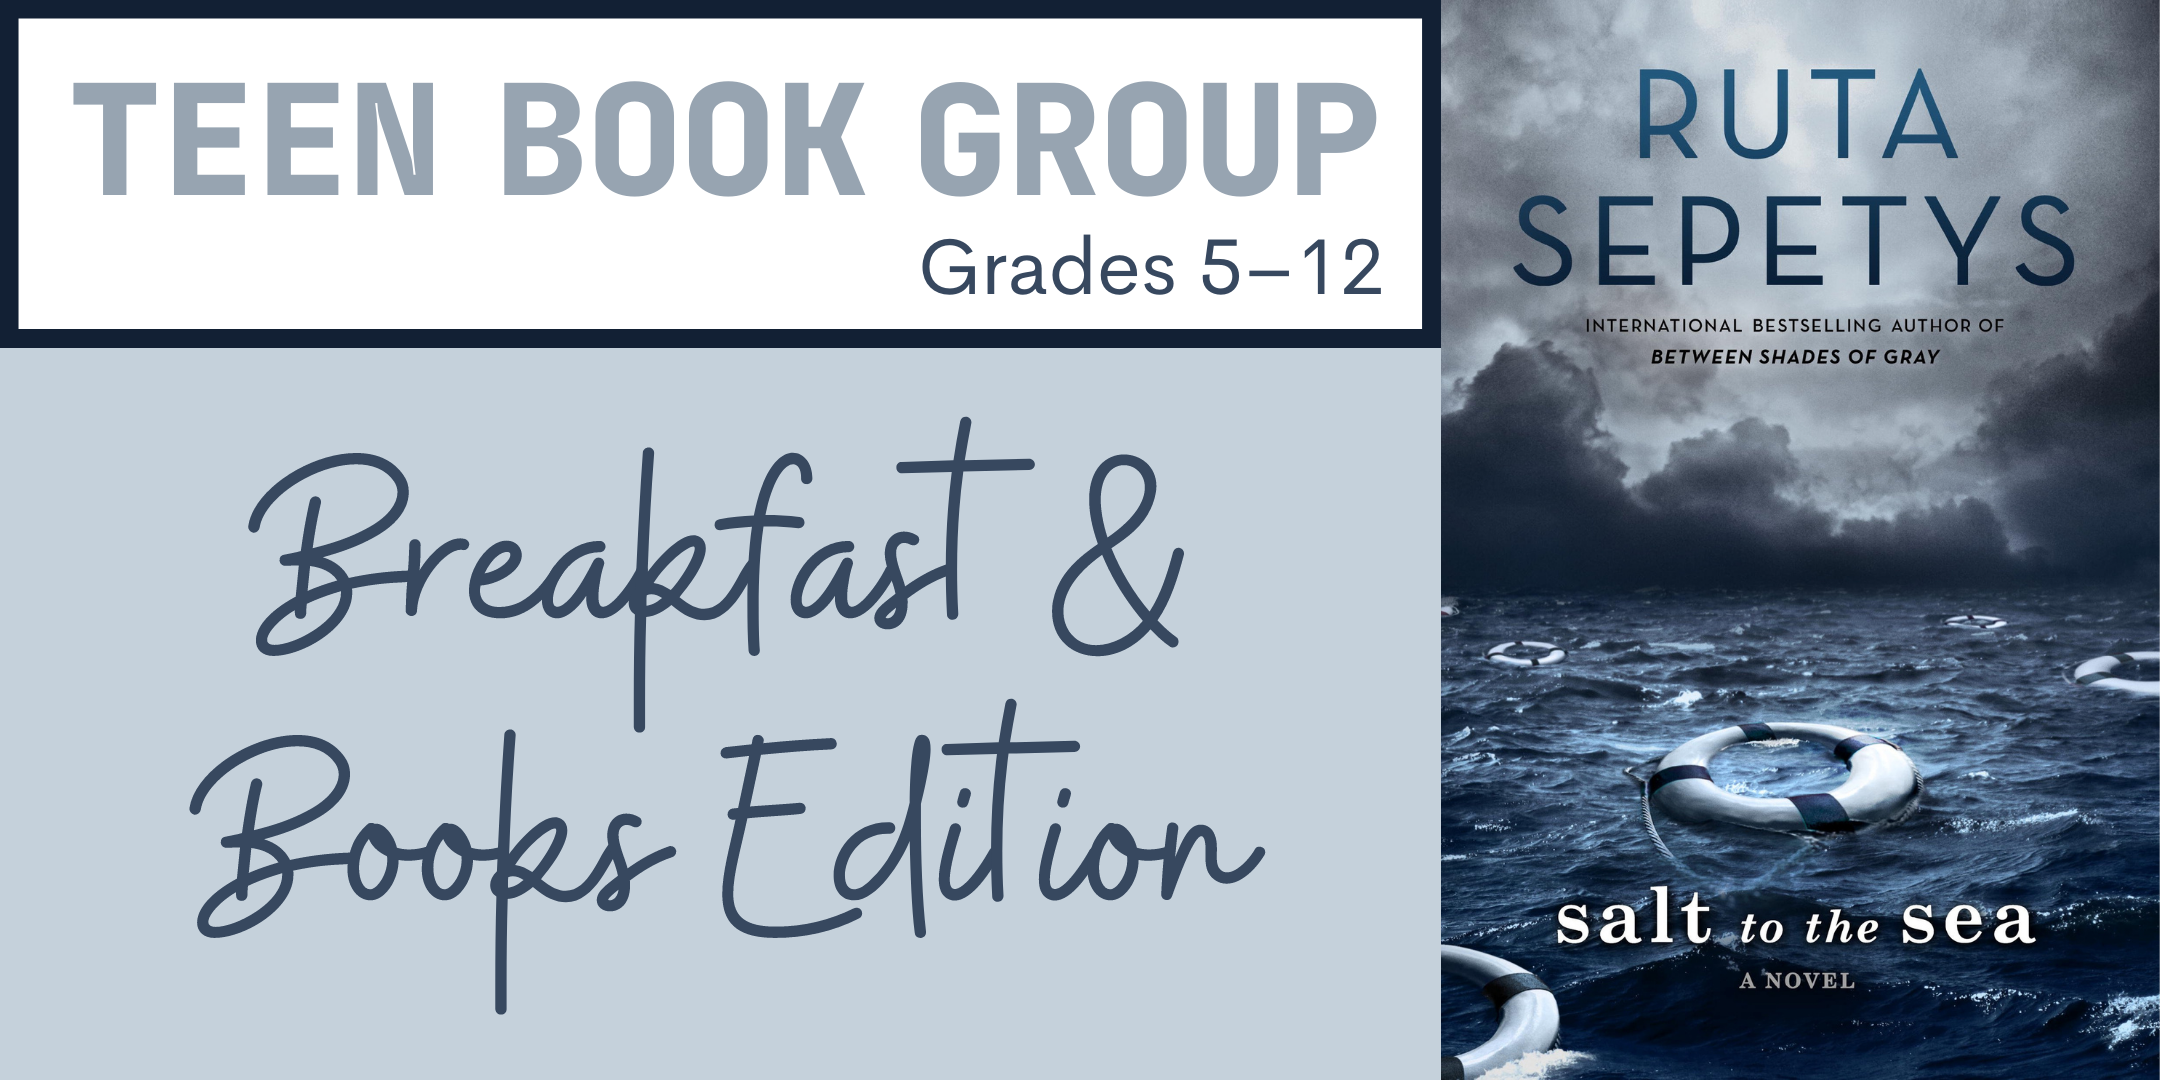 Teen Book Group, Breakfast and Books Edition: Grades 5-12 featuring "Salt to the Sea" by Ruta Sepetys image